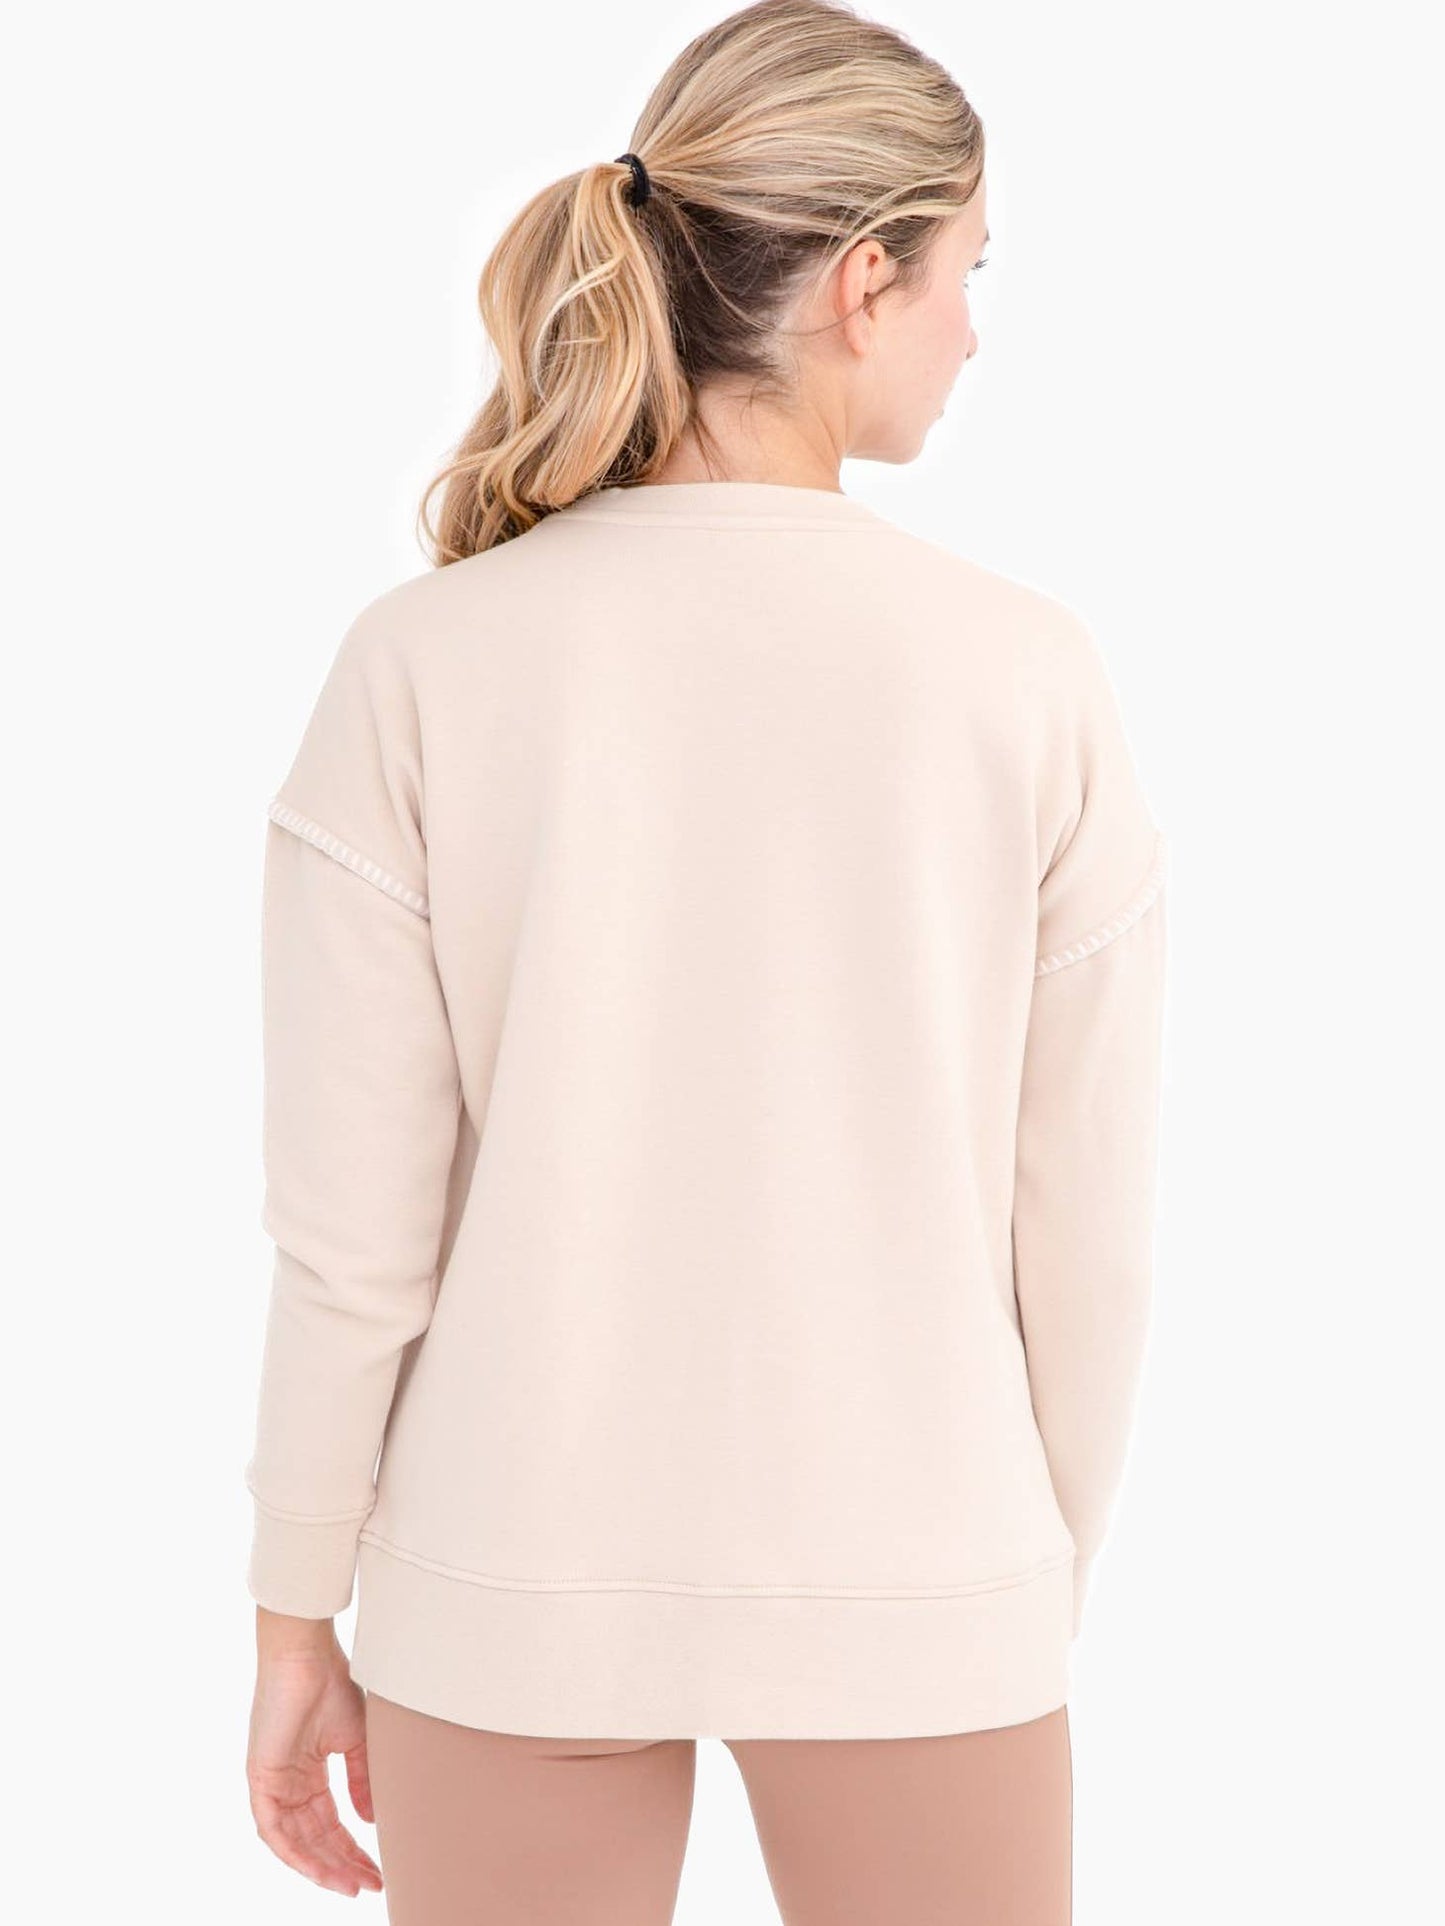 Contrast Stitch Top with Raglan Sleeves - Storm and Sky Shoppe - Mono B